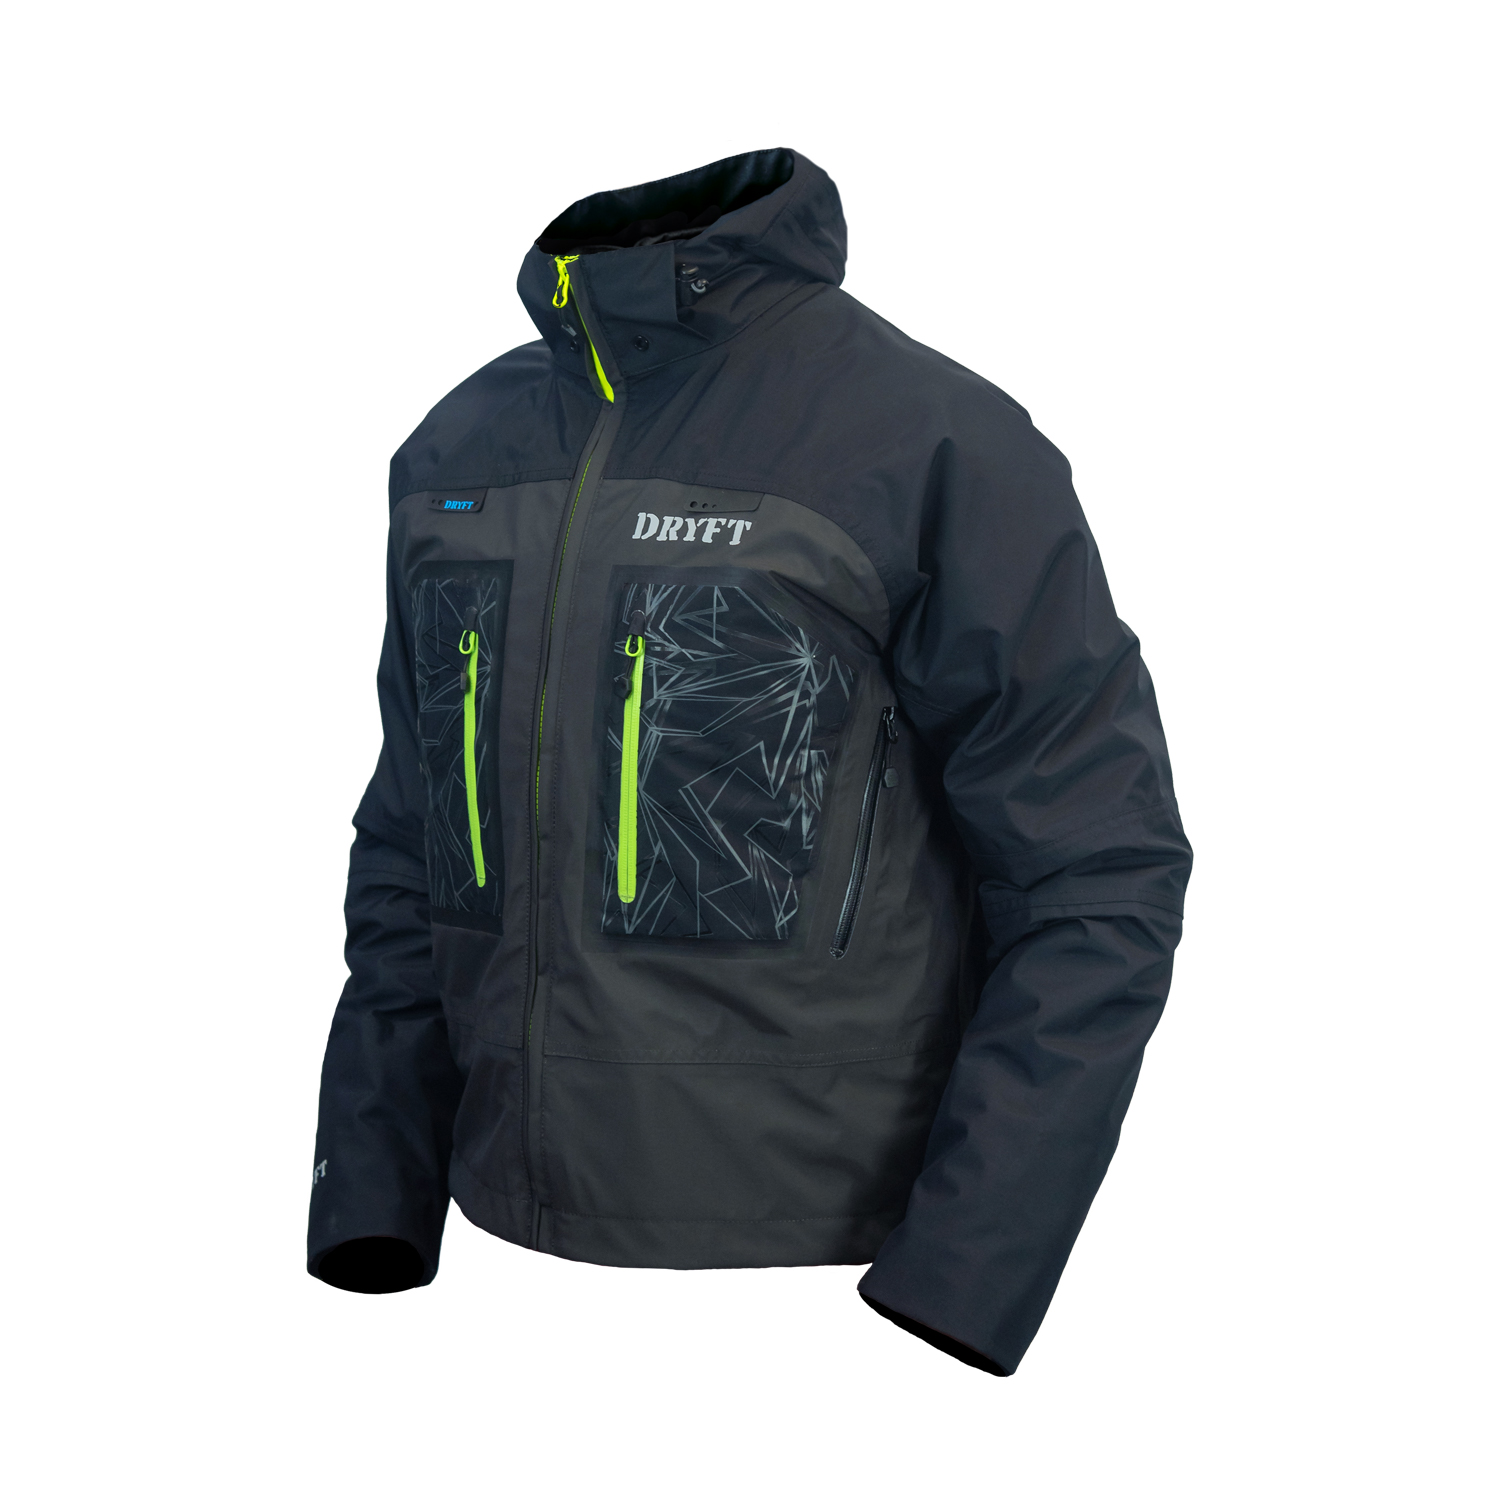 Wading jackets - best protection in all weathers